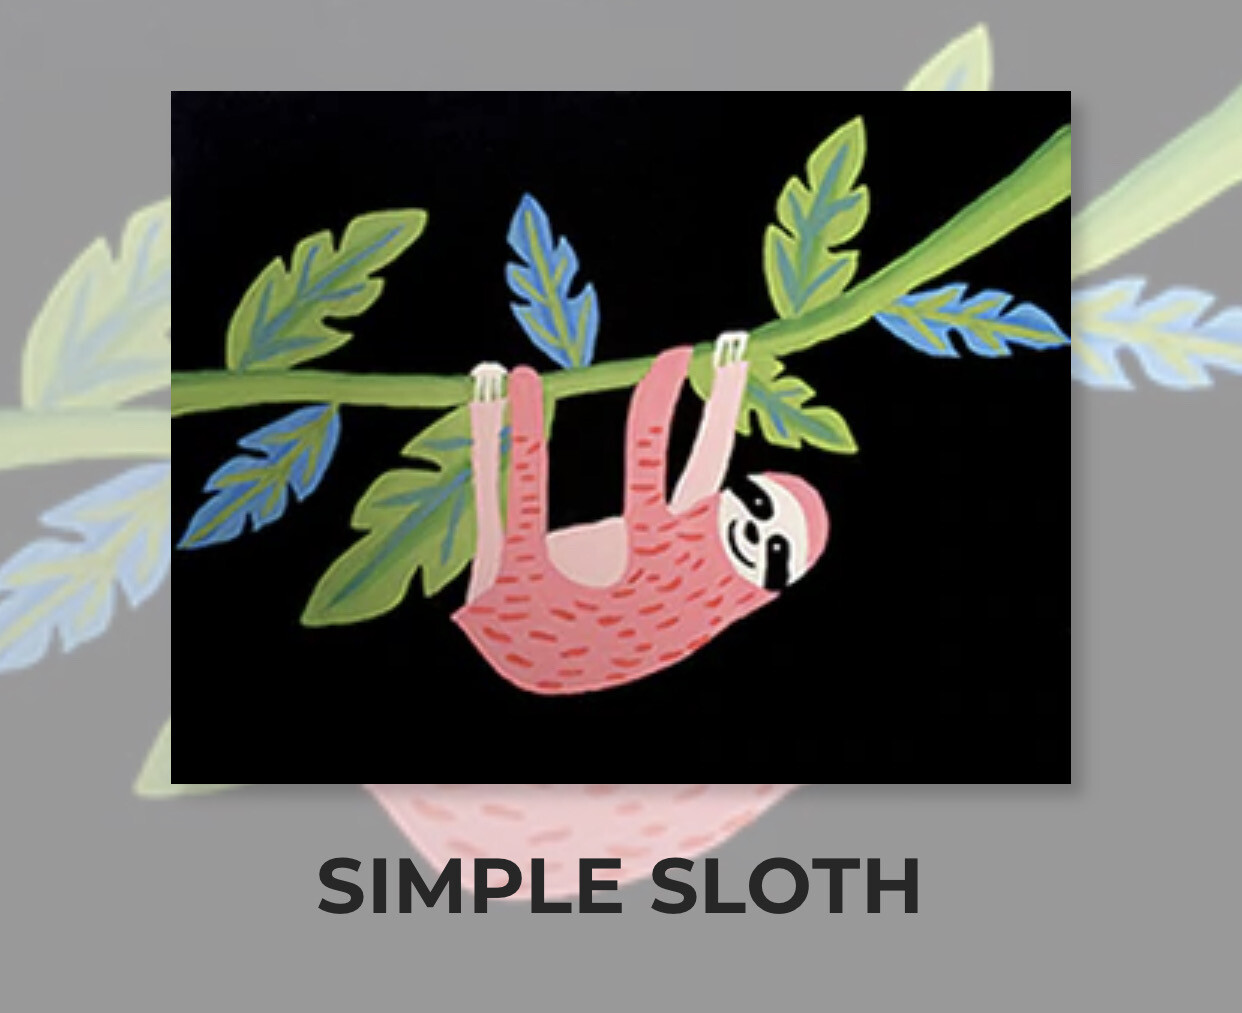 Simple Sloth ADULT Acrylic Paint On Canvas DIY Art Kit - 3 Week Special Order